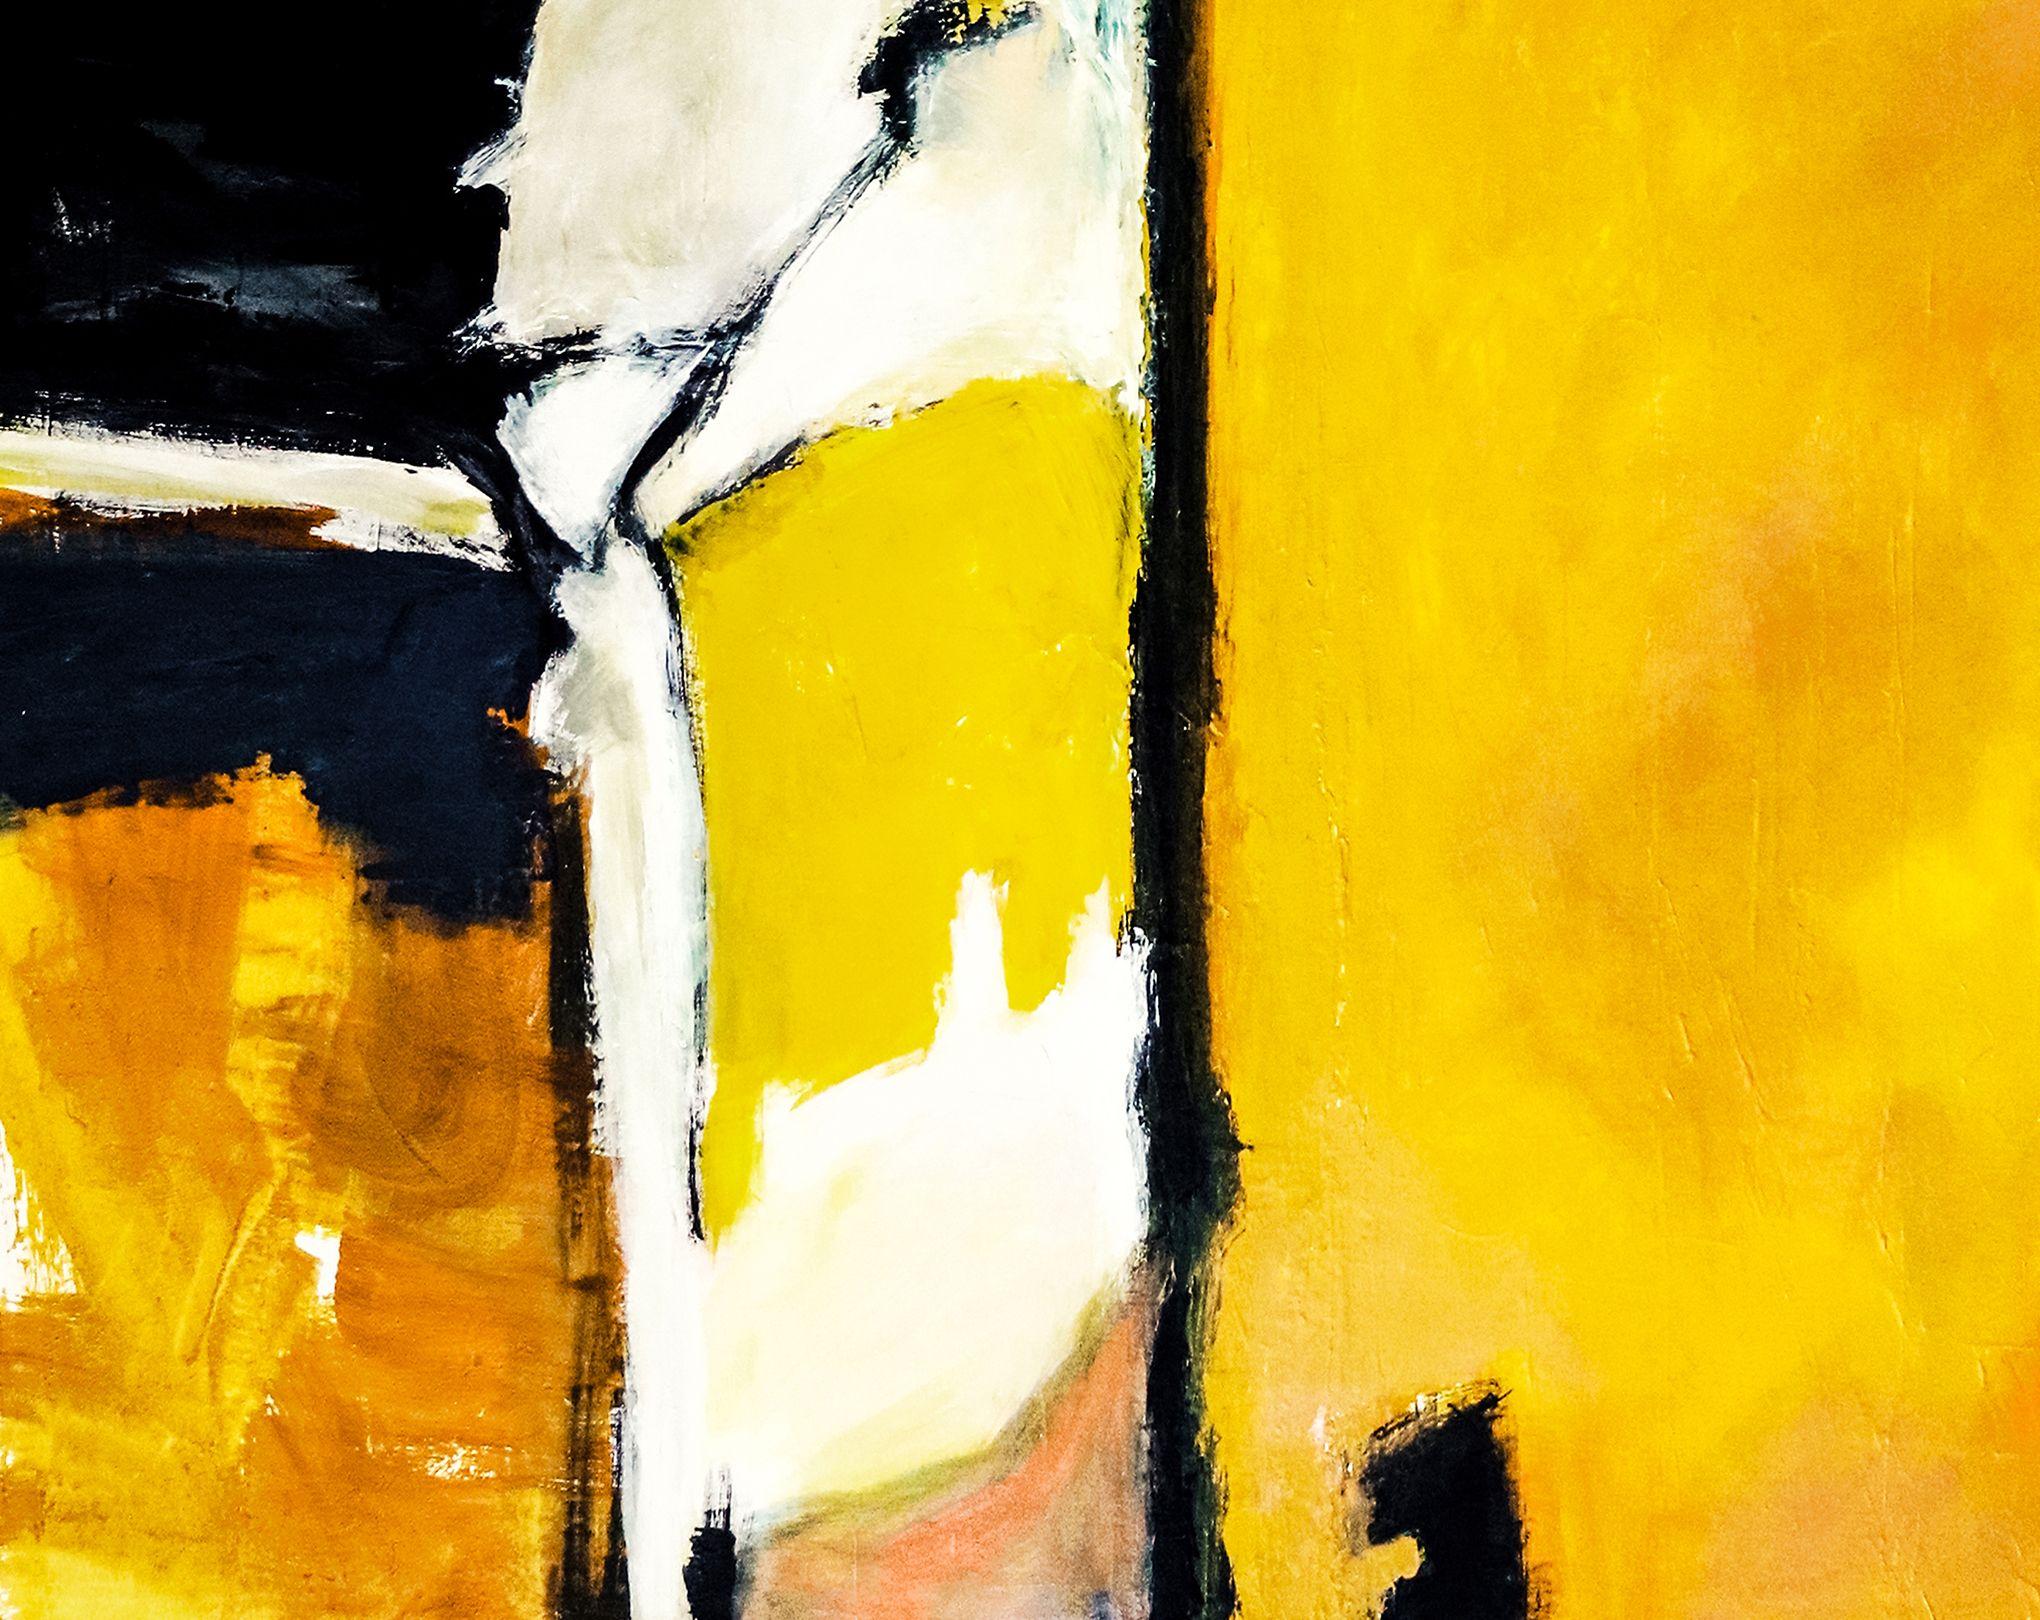 An abstract expressionism, acrylic painting on canvas, colors of black, yellow and blue. â€¢ PICTURE HANGER ATTACHED: Yes â€¢ SIDES PAINTED: Yes â€¢ READY TO HANG: Yes â€¢ ARTIST SIGNED: Yes â€¢ CERTIFICATE OF AUTHENTICITY: Yes, This is an Original